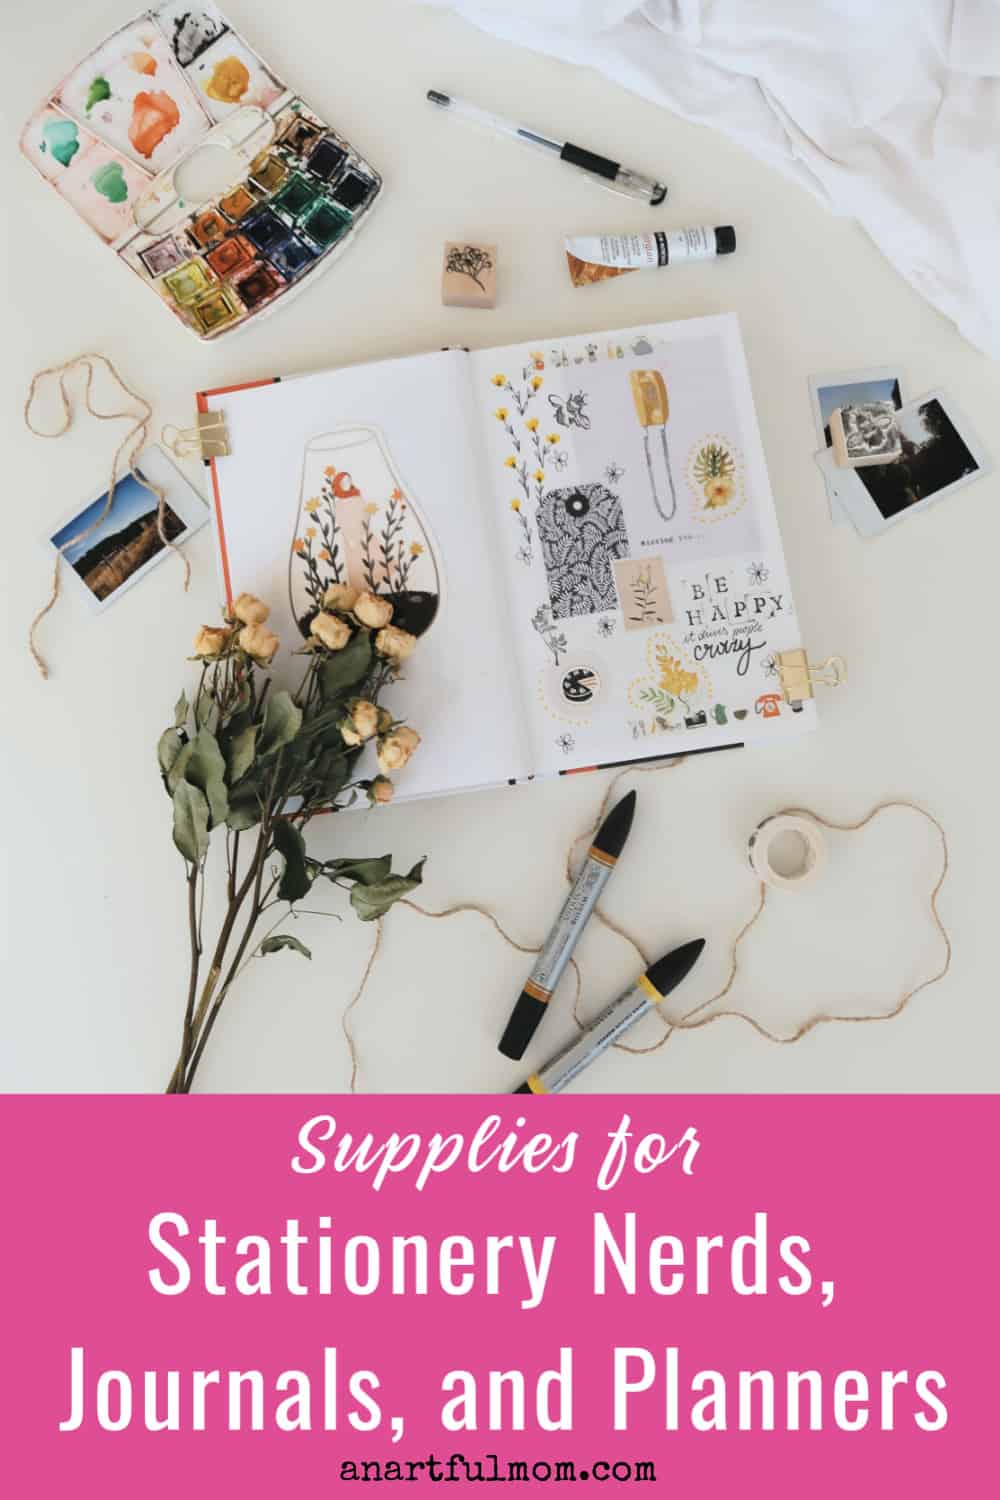 Supplies for Stationery Nerds and Journal Lovers (at a Scrapbook Site)